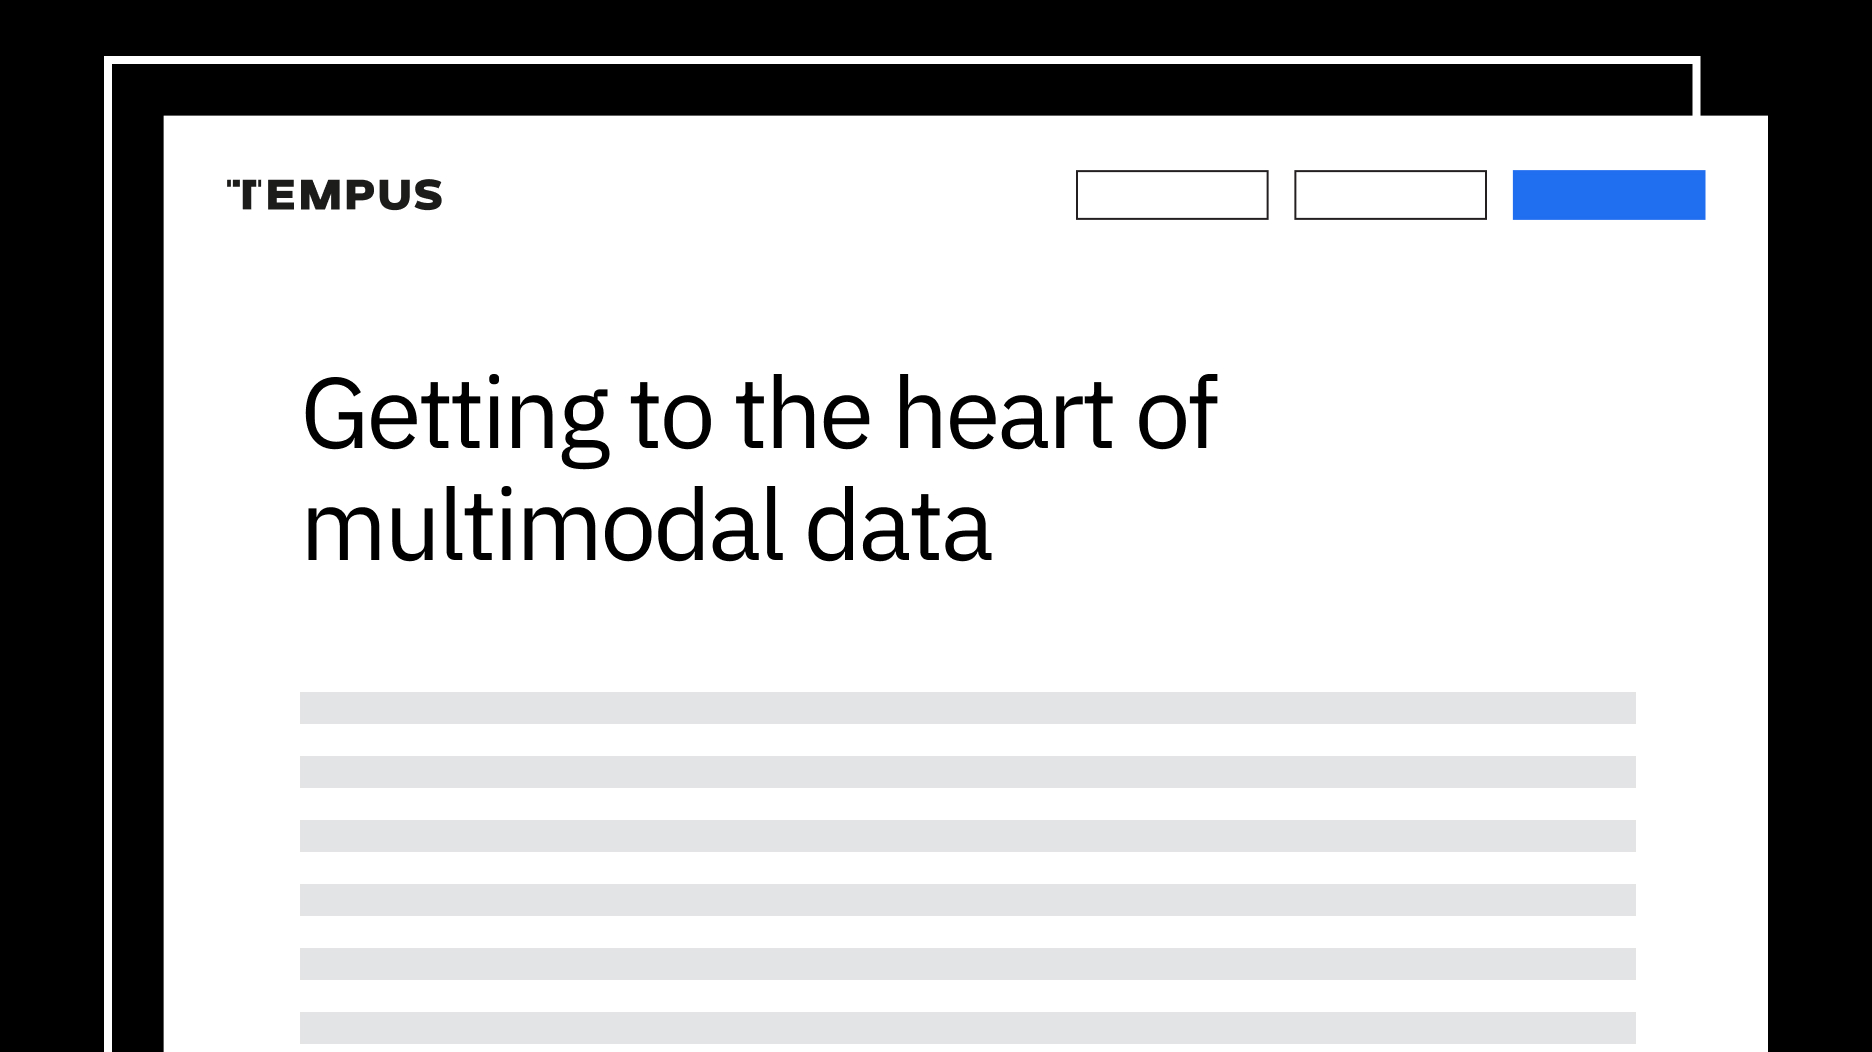 Getting to the heart of multimodal data